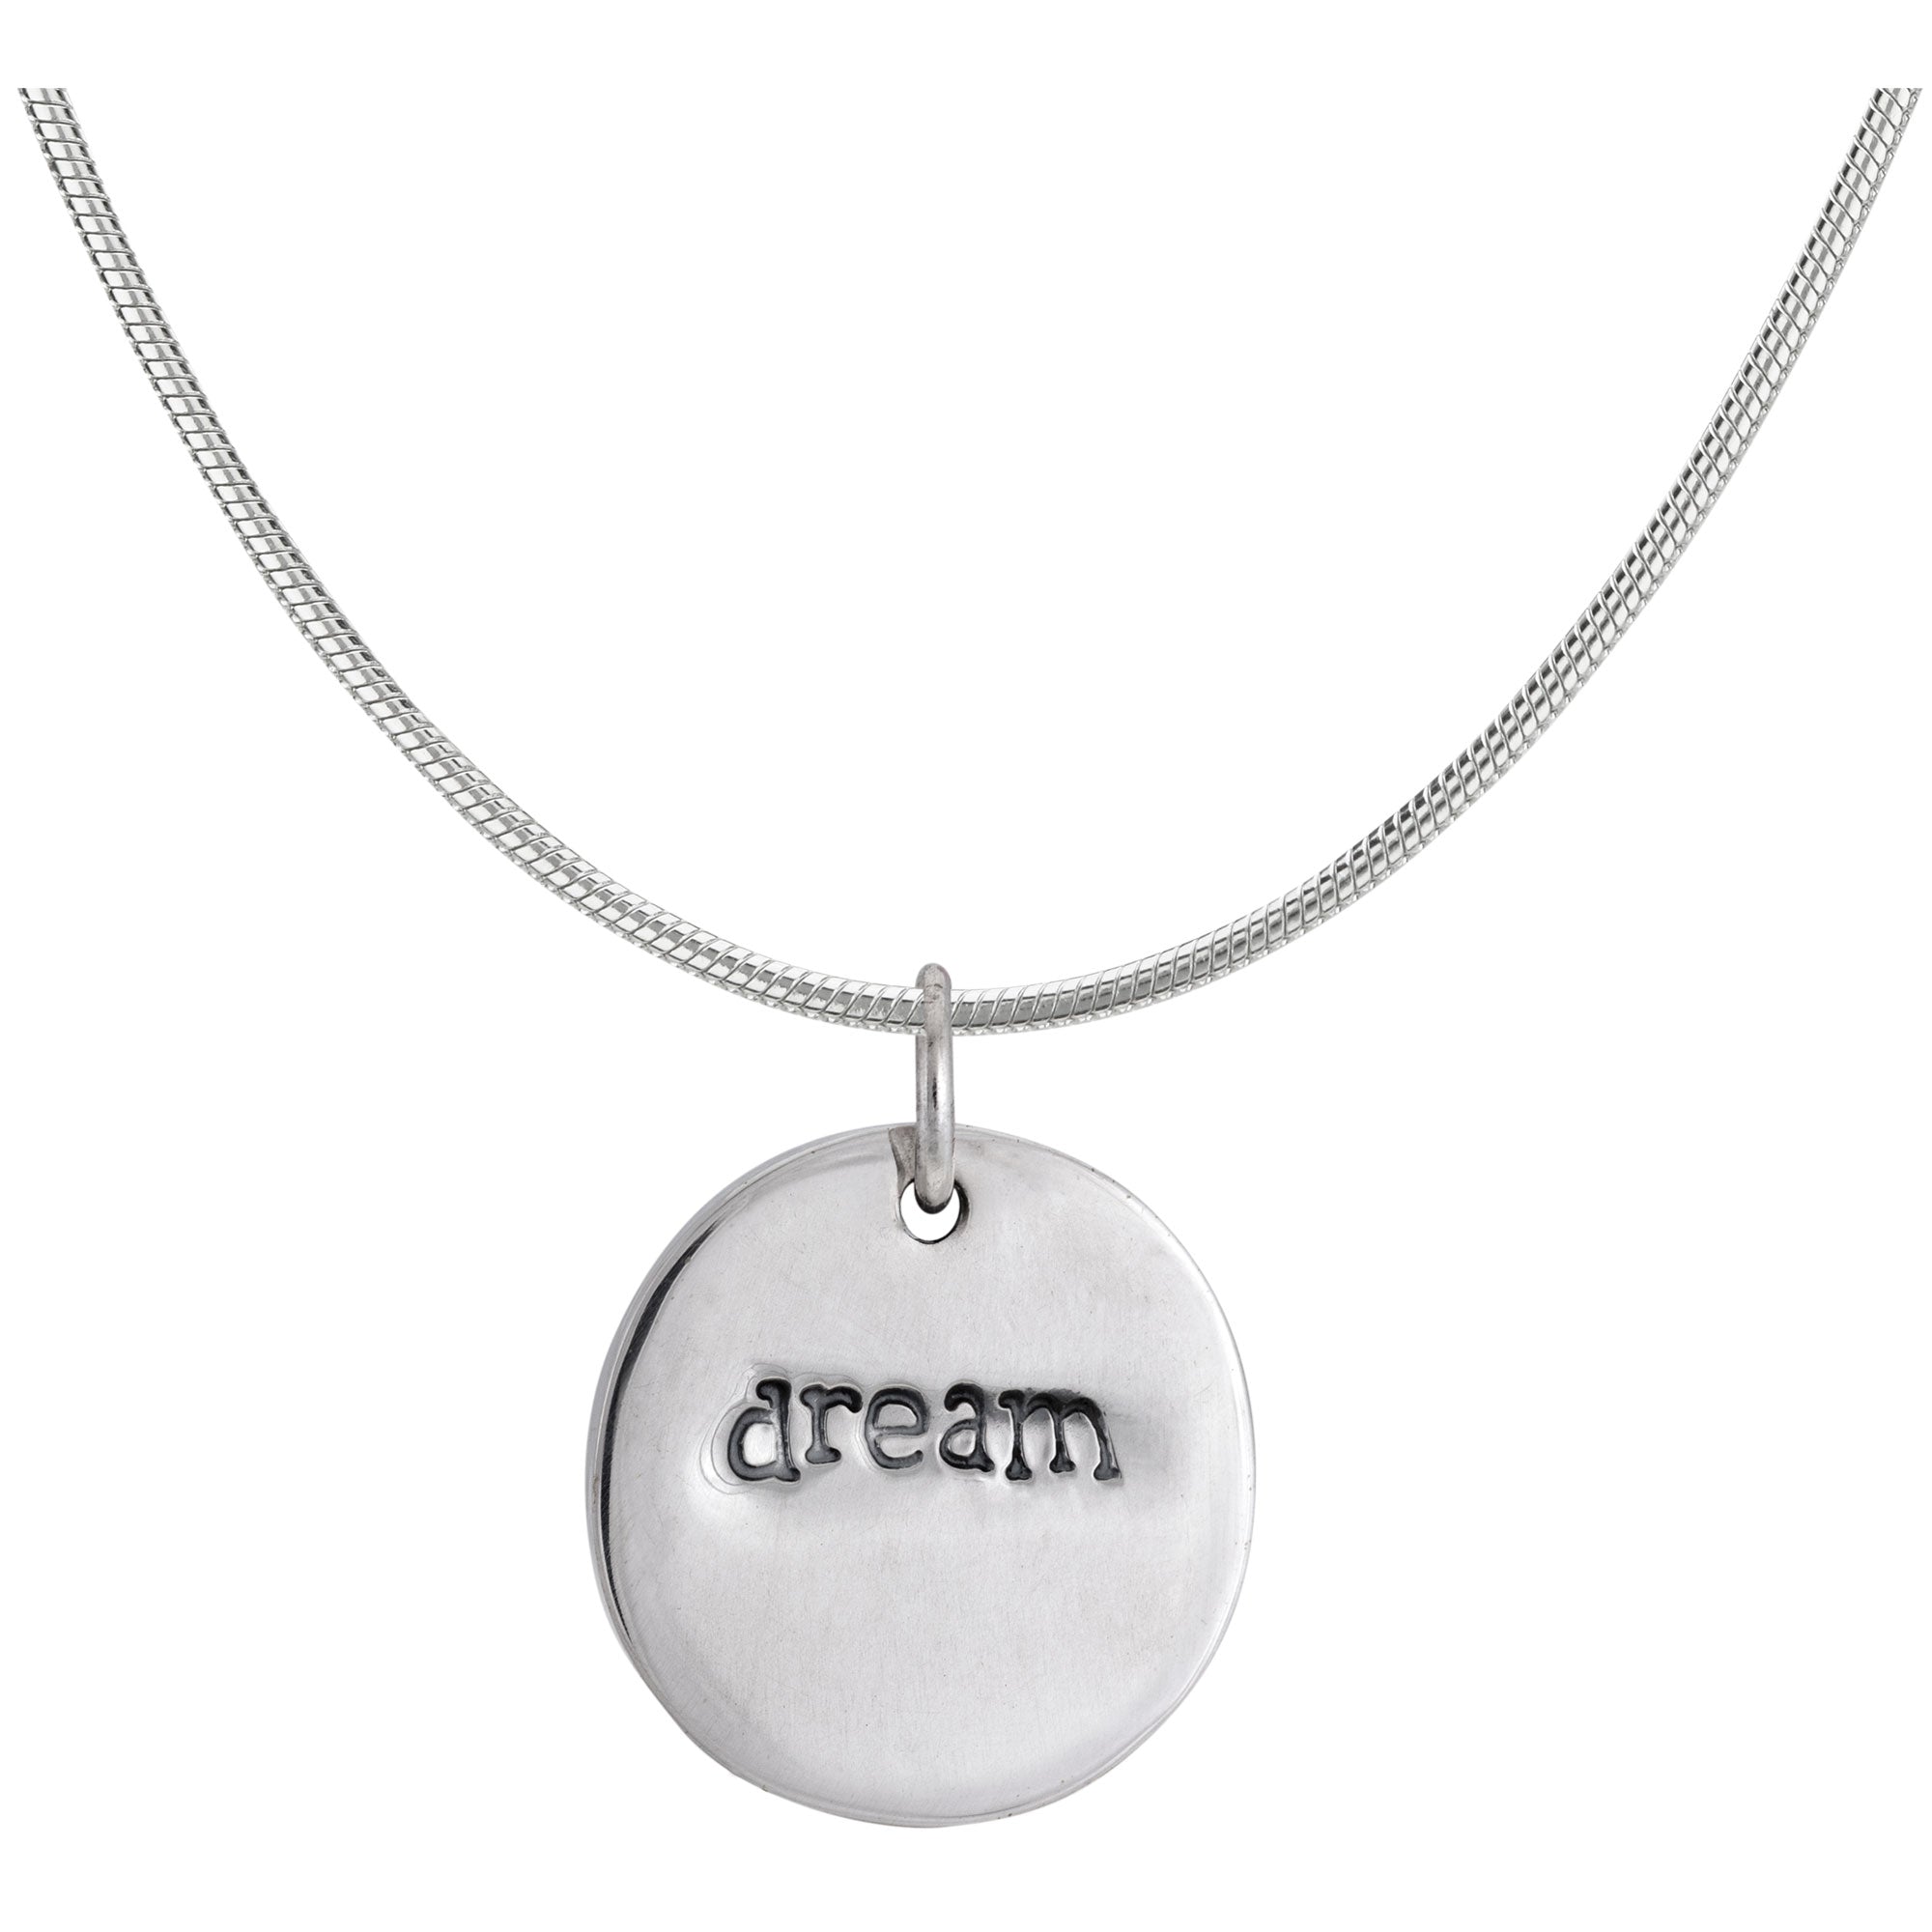 Believe Dream Double Sided Sterling Necklace - Pendant Only